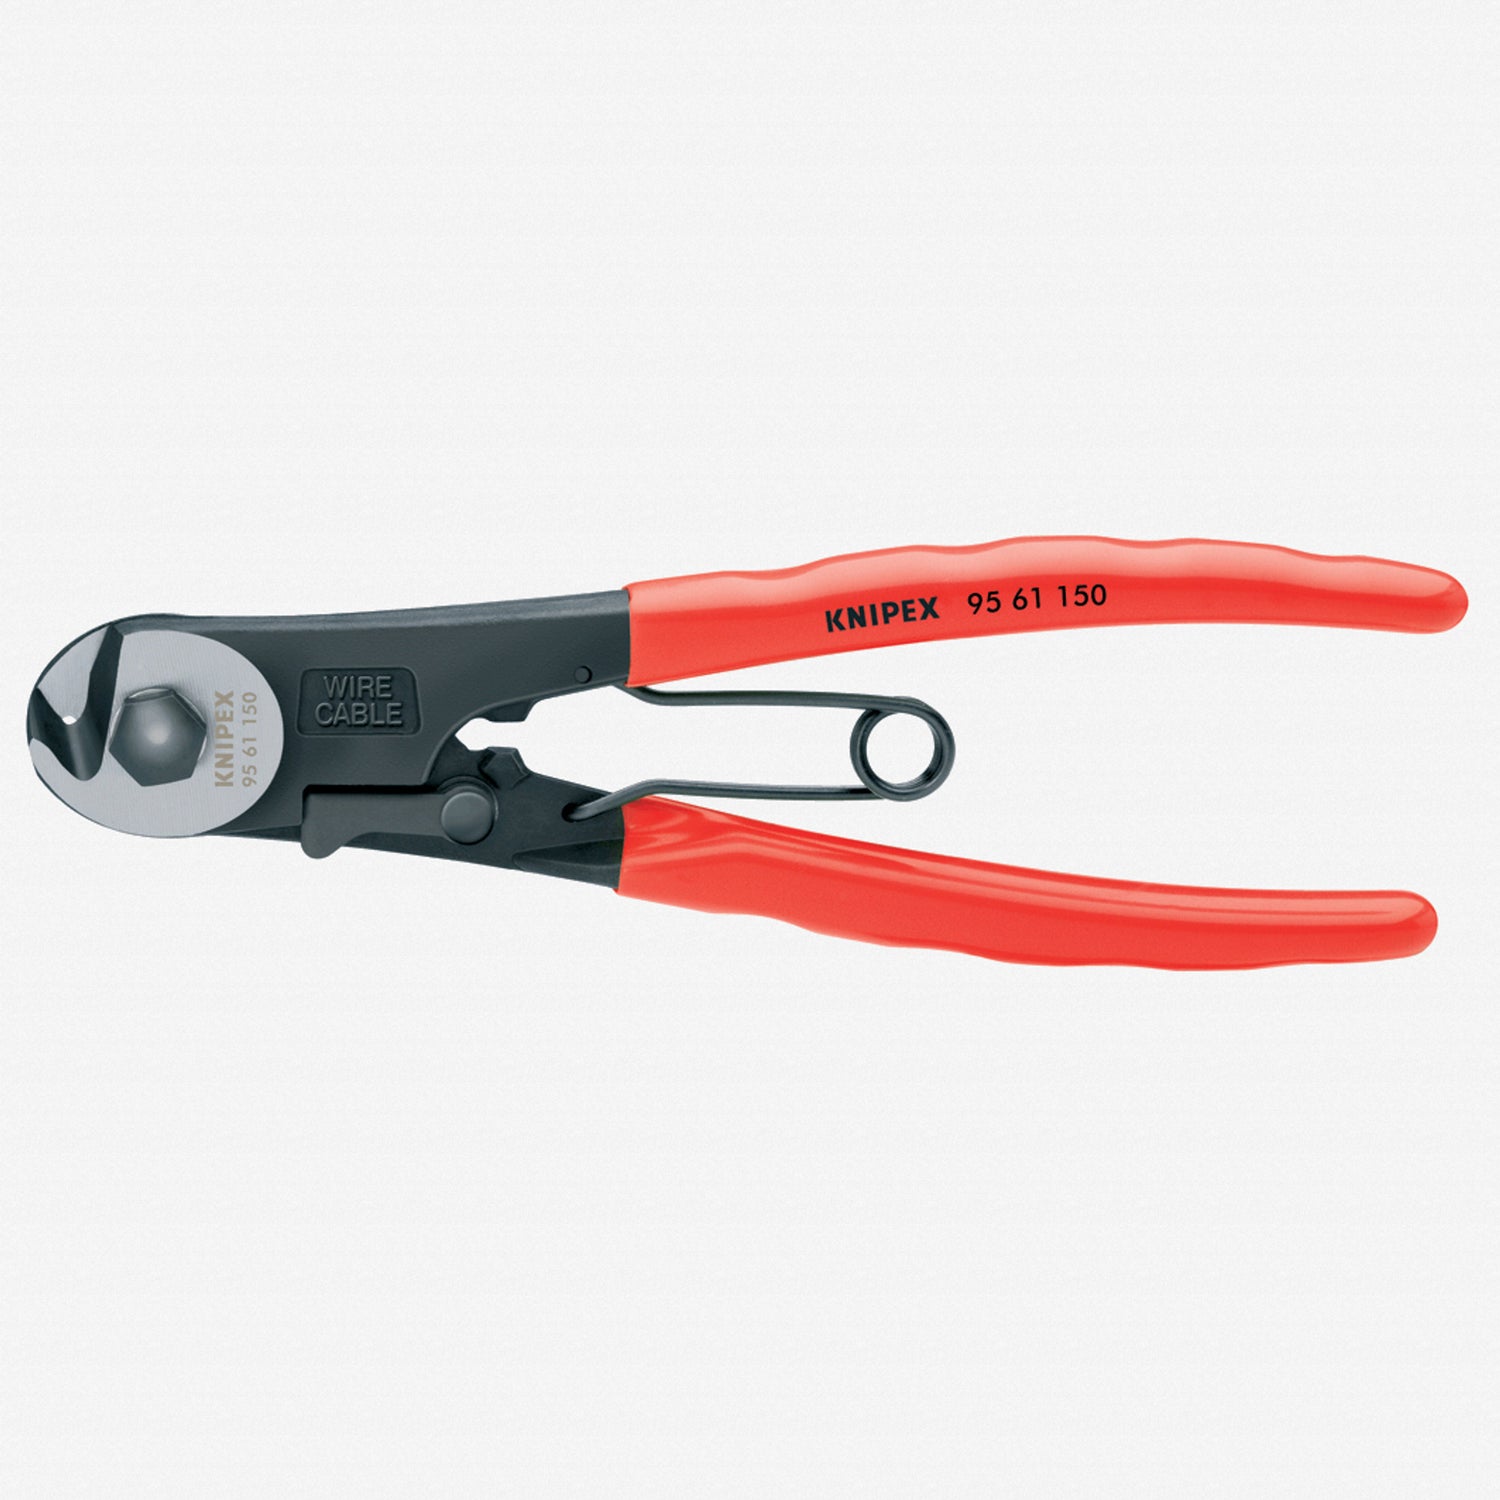 Cable Shears/Cutters